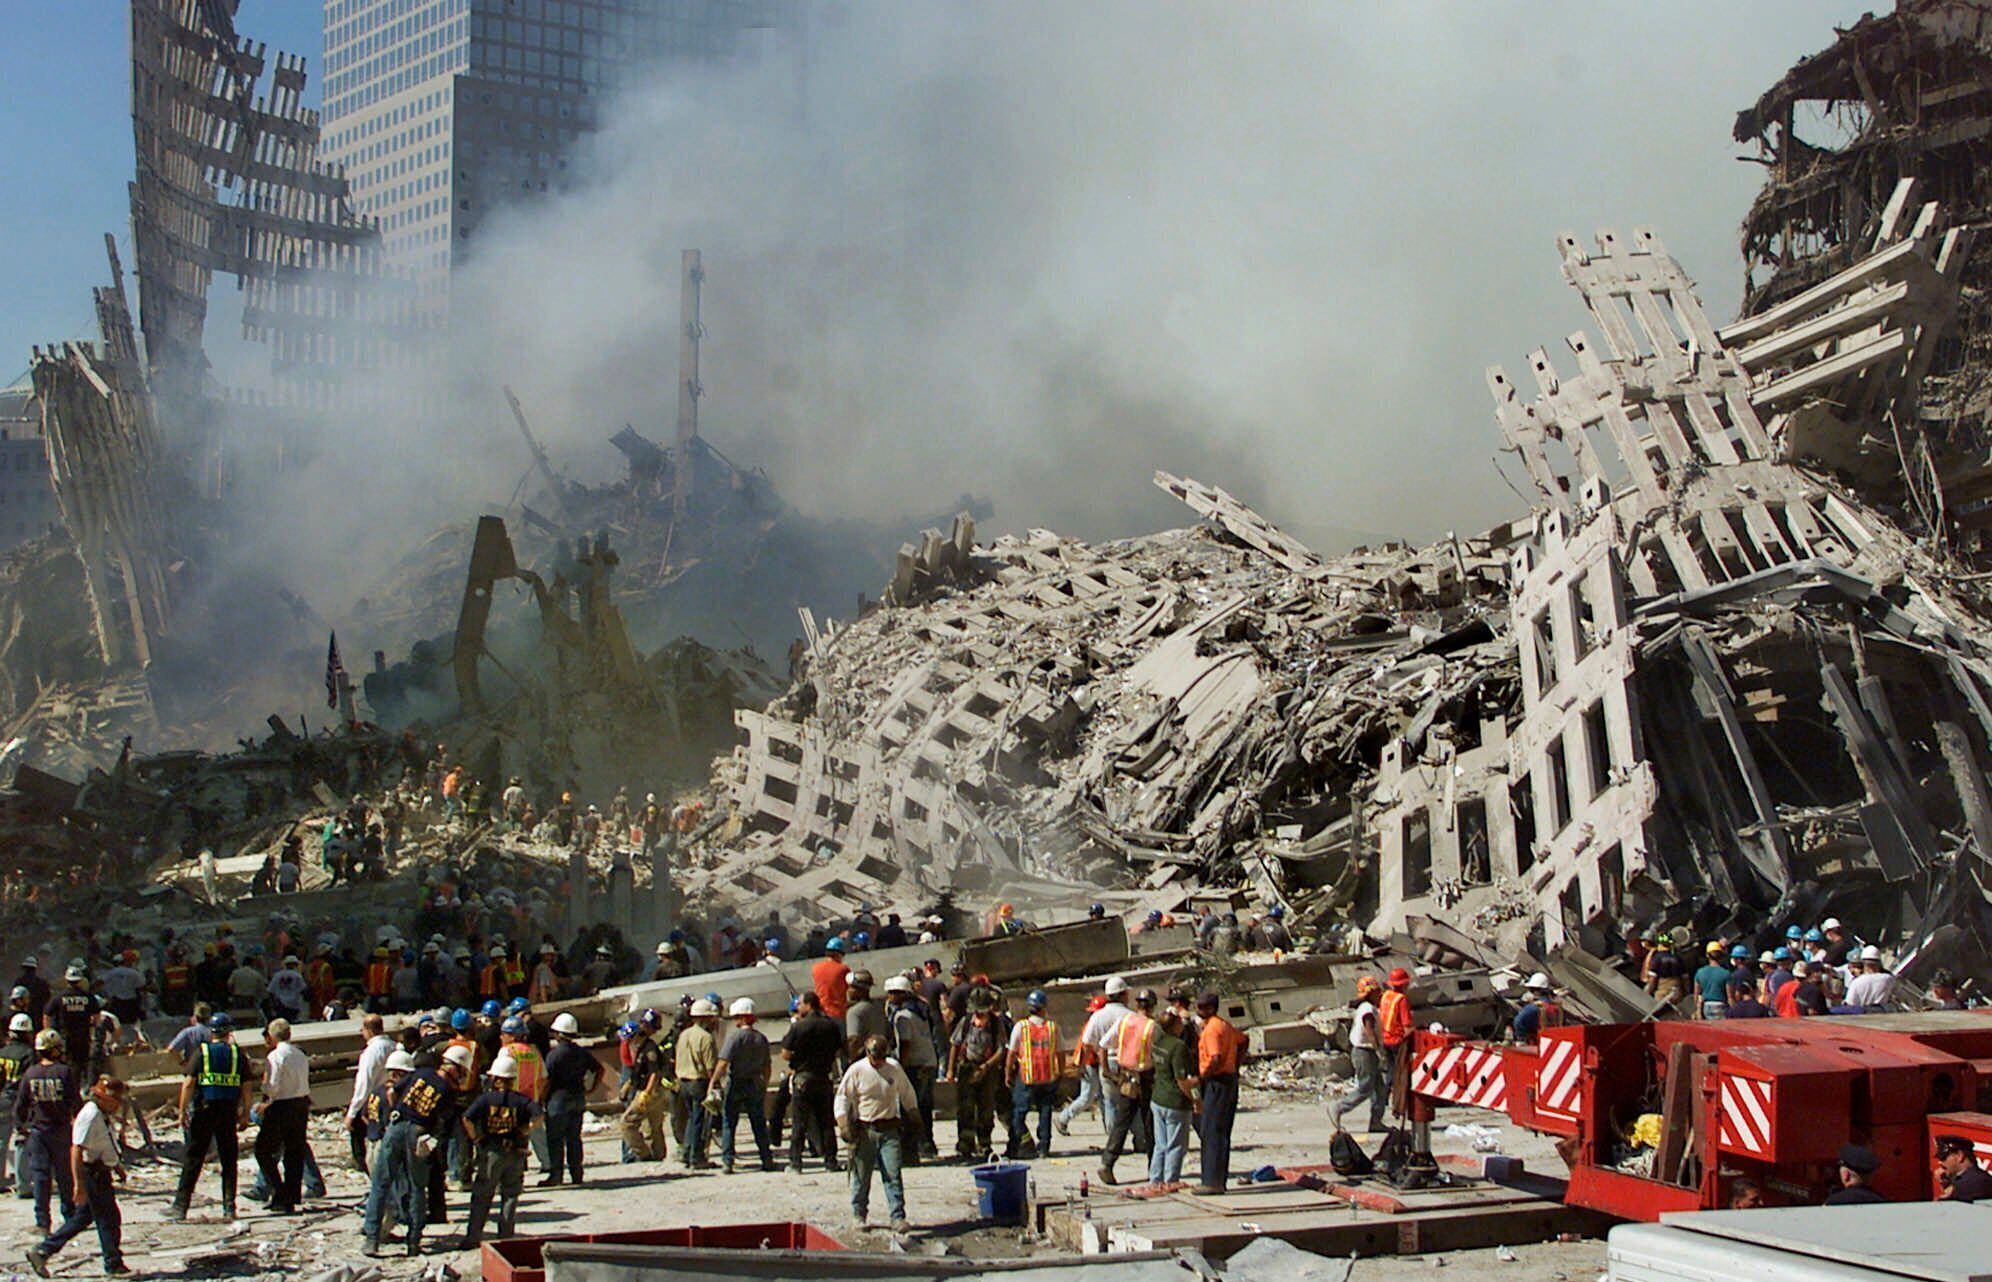 One hoax after another: 9/11 conspiracy theories through two decades